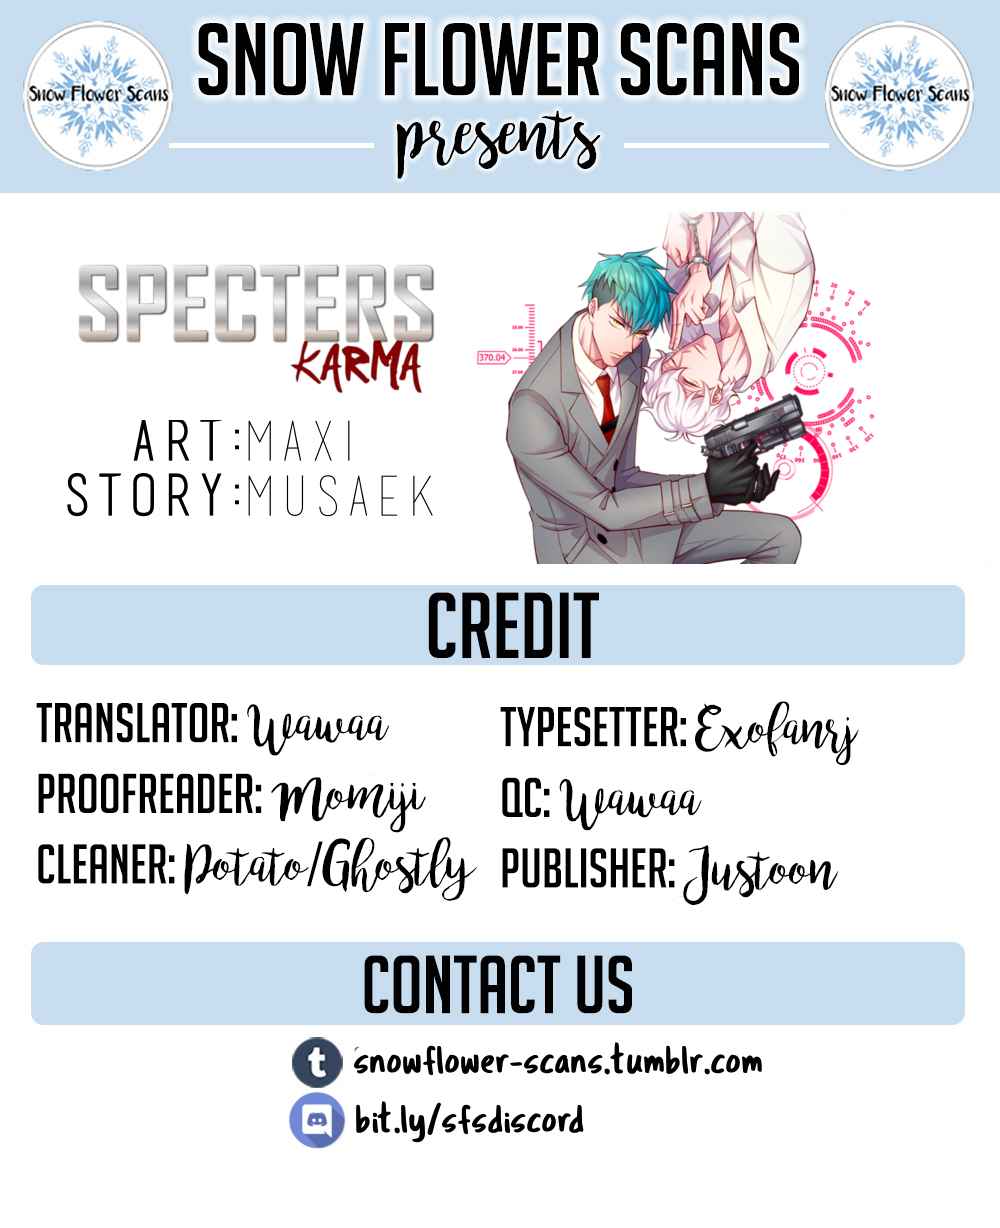 Specters : Karma Ch. 13 Skill Name is Science